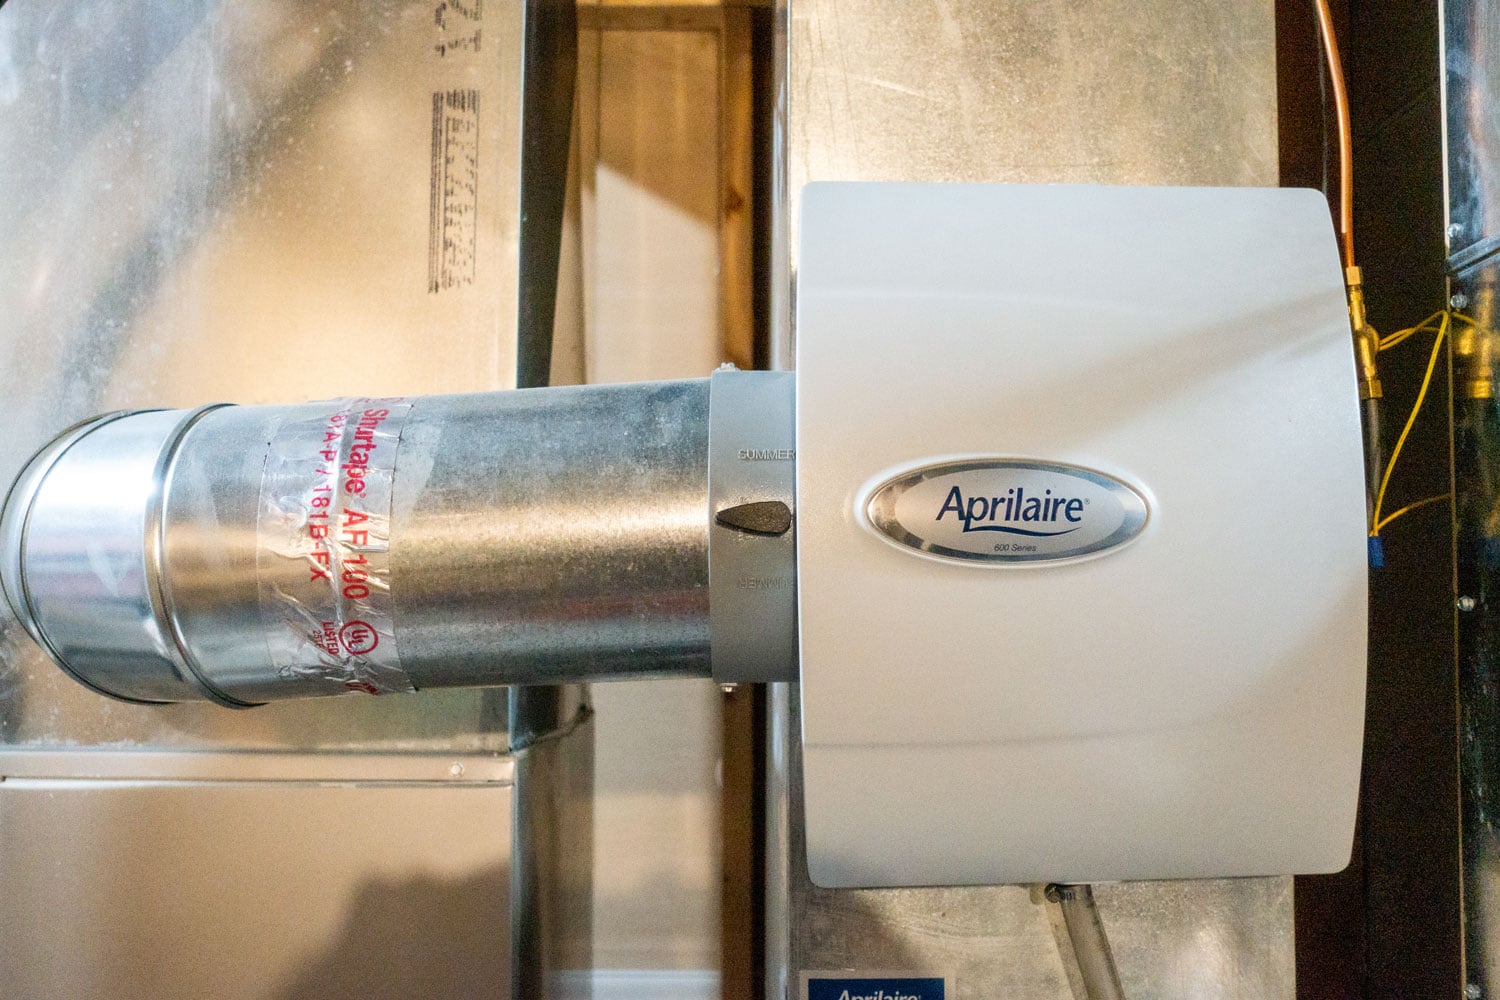 An Aprilaire humidifier mounted on the air duct